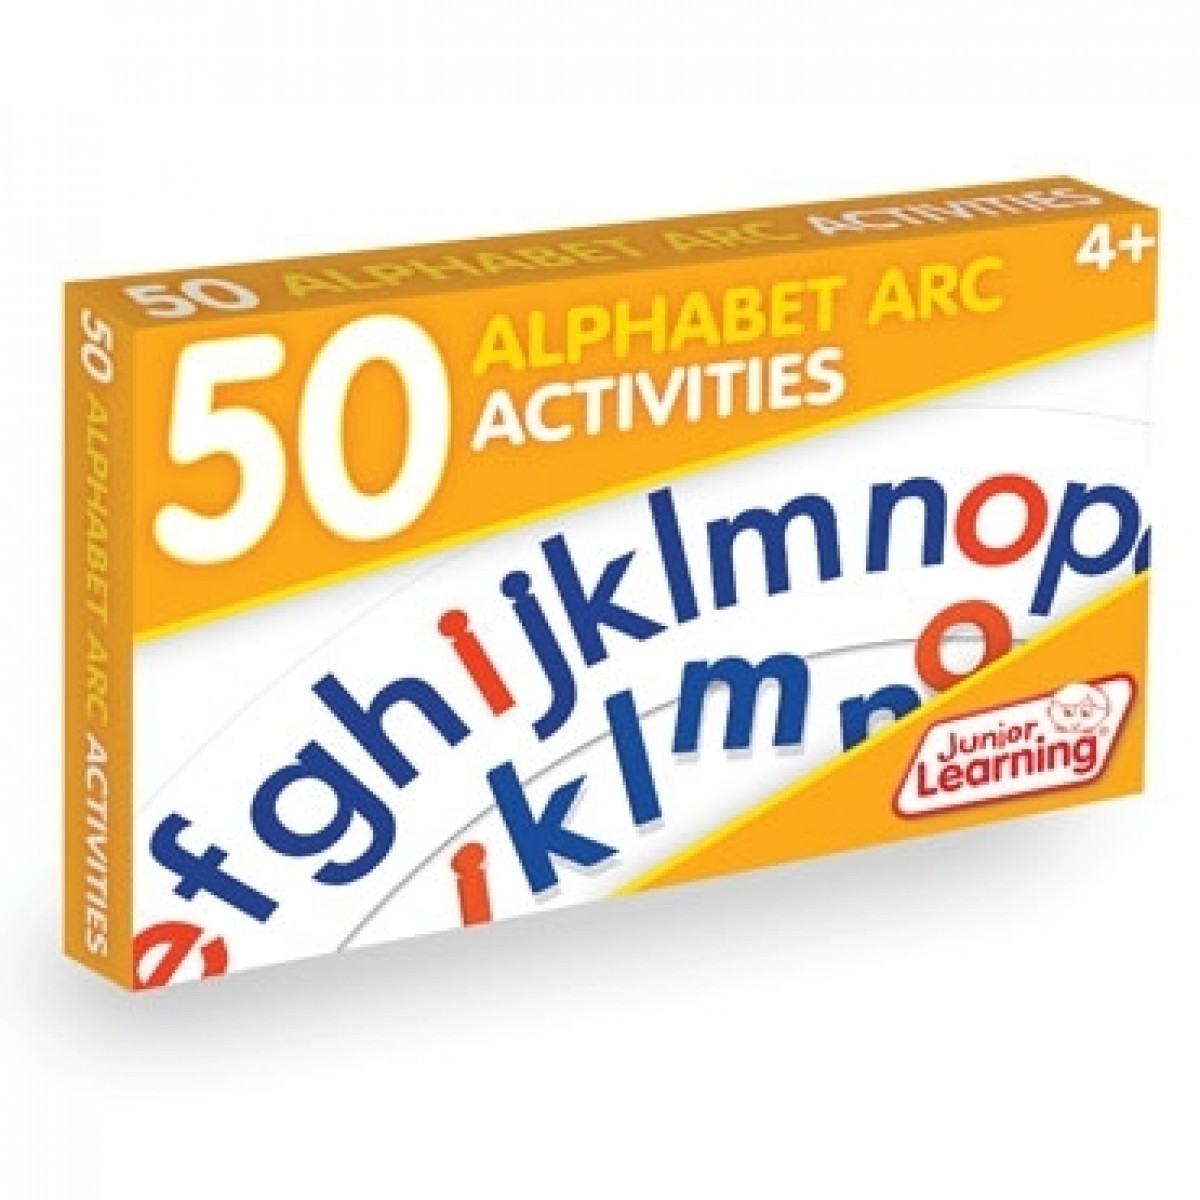 50-alphabet-arc-activity-cards-junior-learning-educational-resources